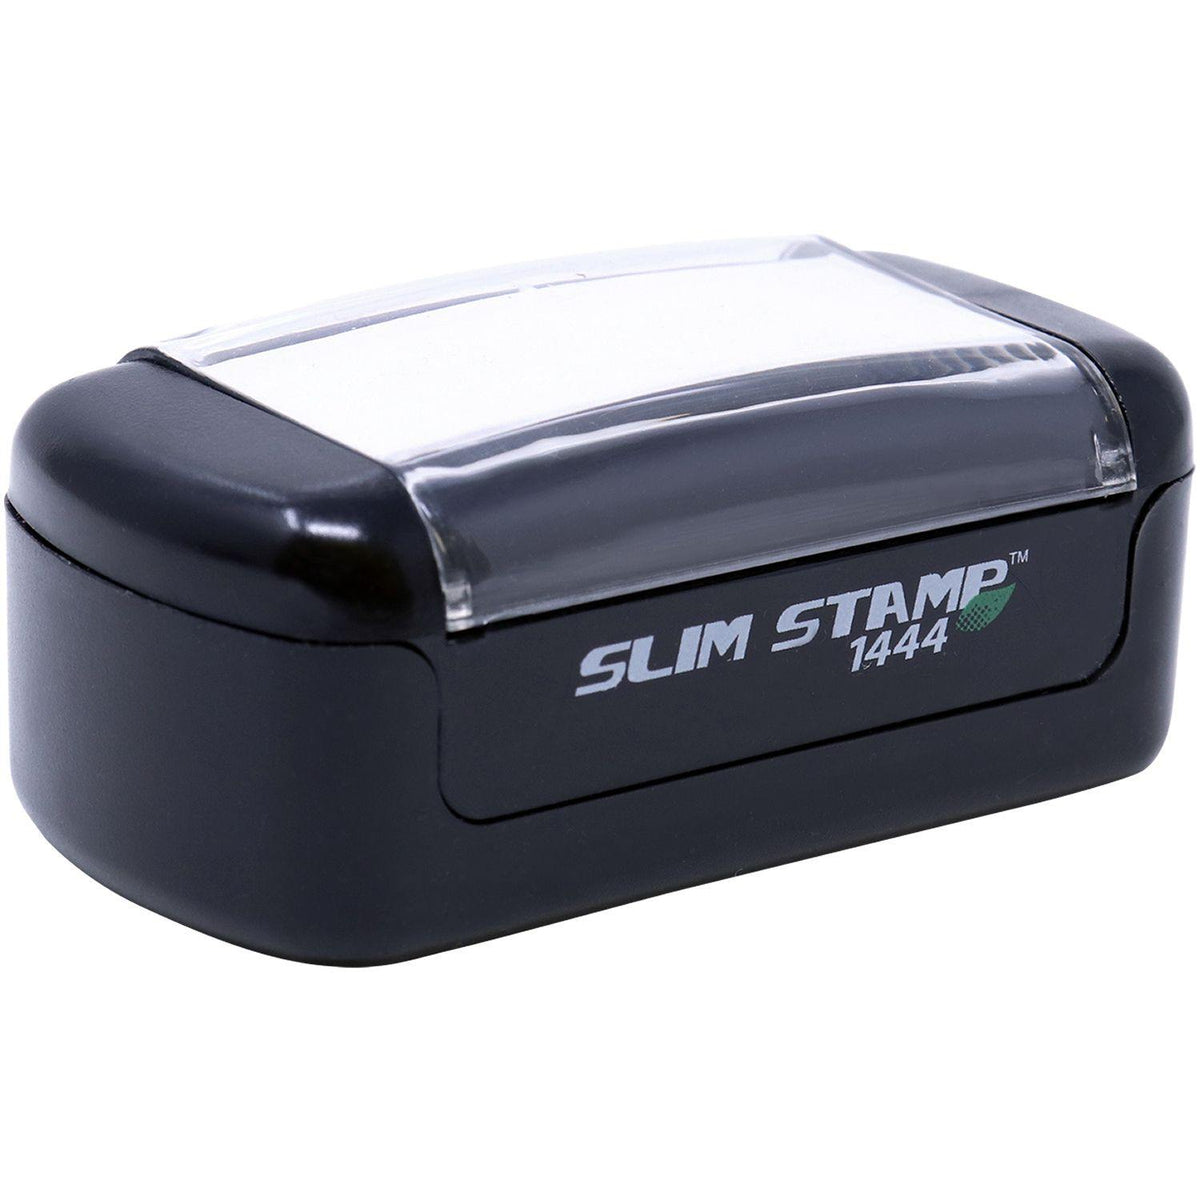 Alt View of Slim Pre-Inked Social Distancing Stamp Mount Angle